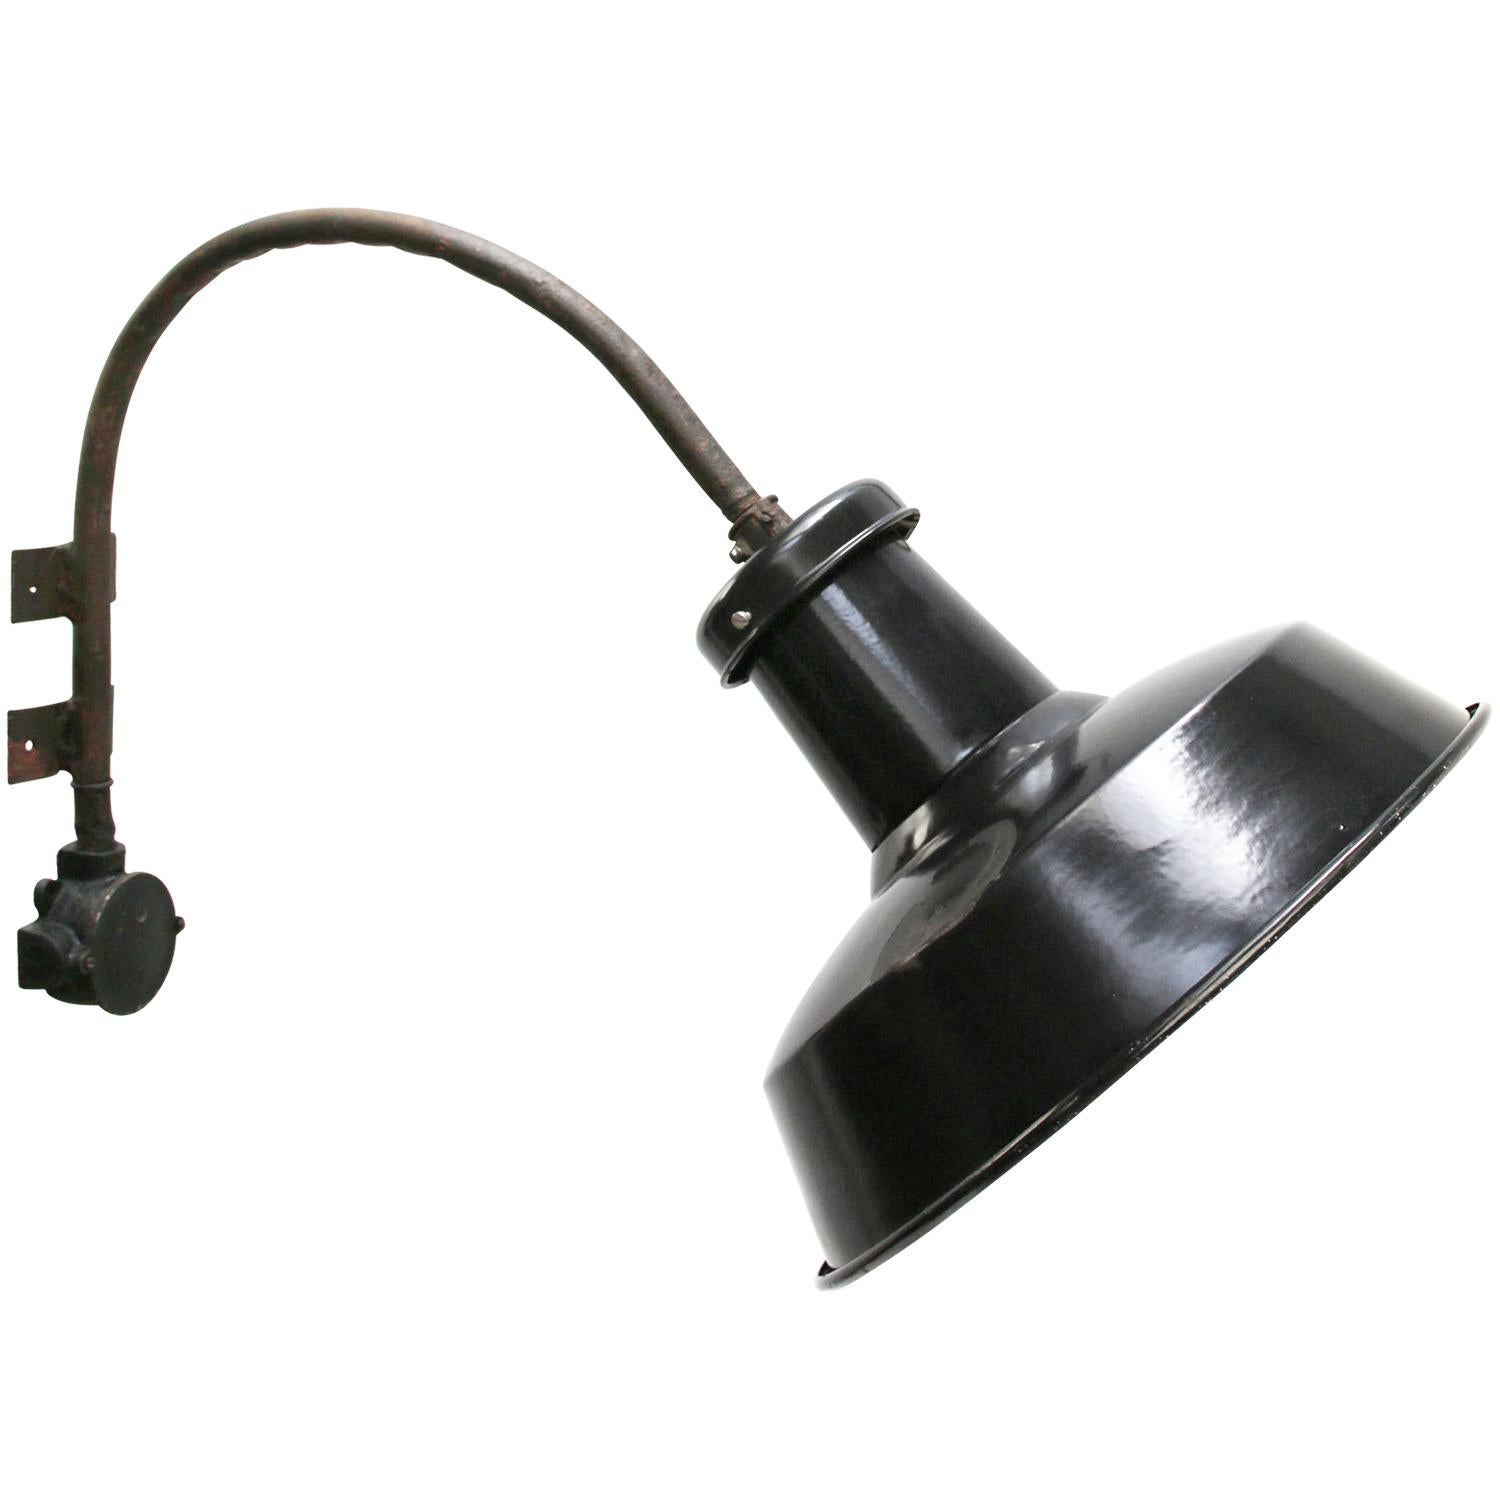 French factory wall light
black enamel, white interior

Weight: 3.40 kg / 7.5 lb

Priced per individual item. All lamps have been made suitable by international standards for incandescent light bulbs, energy-efficient and LED bulbs. E26/E27